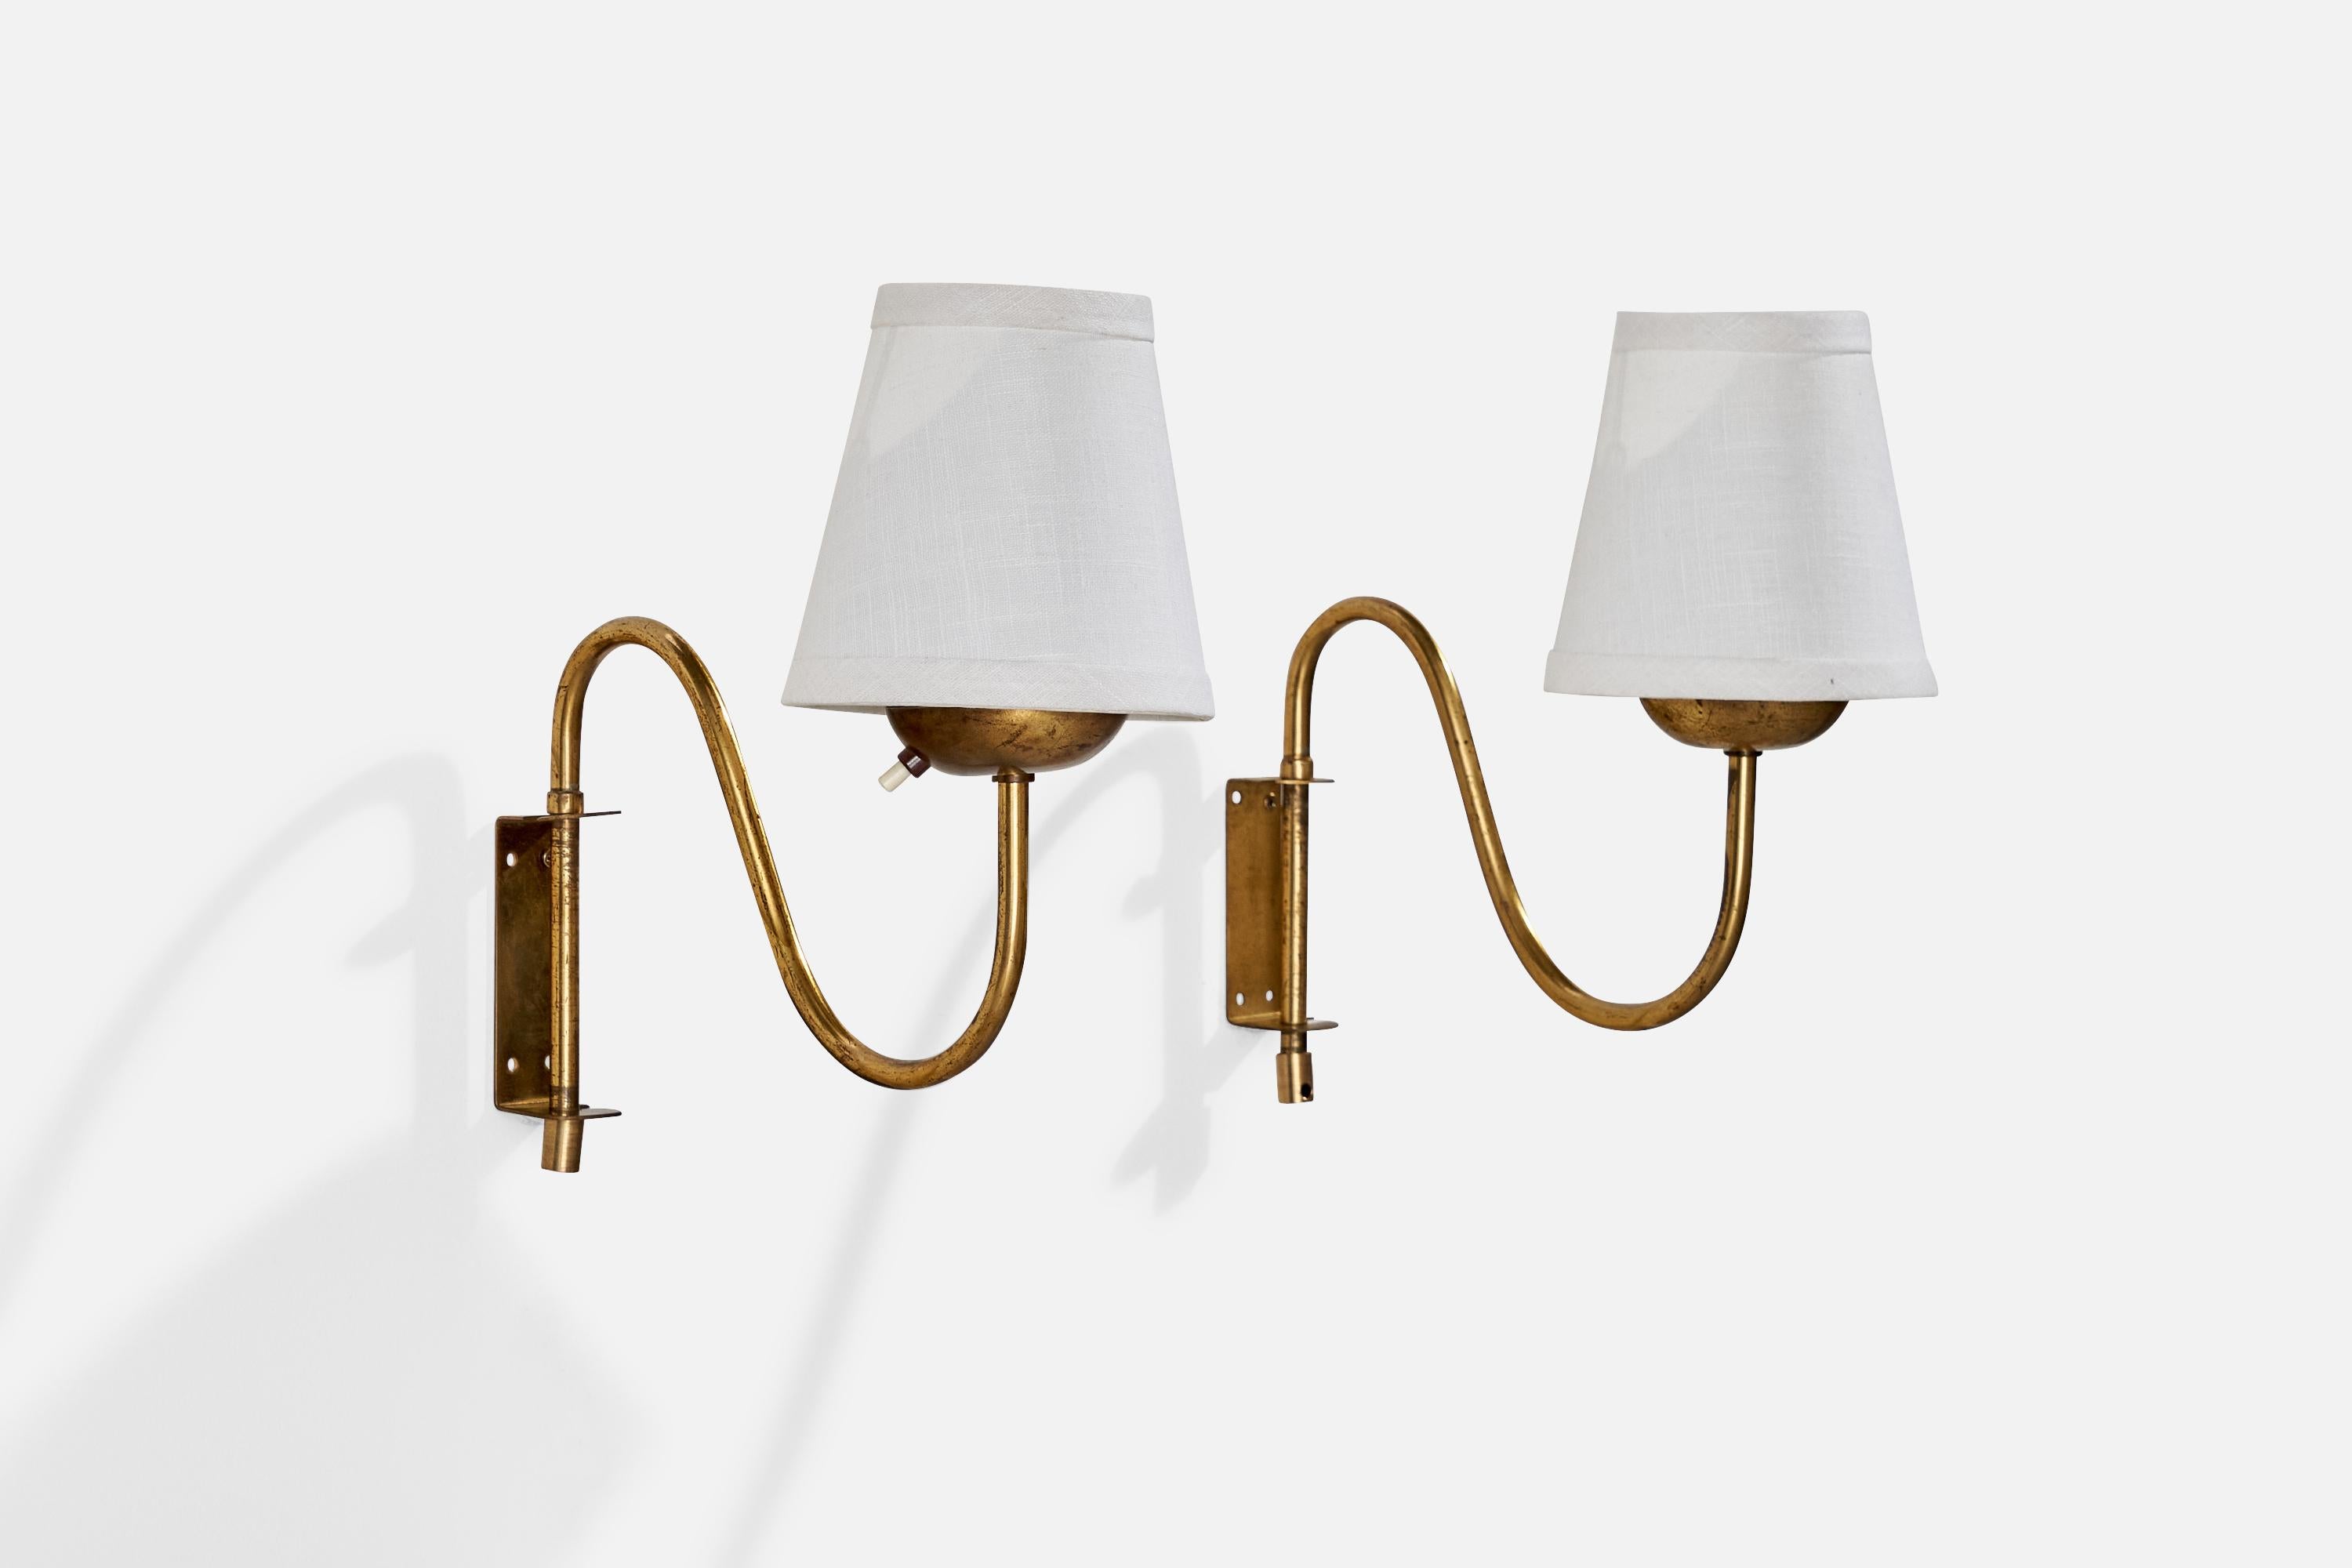 A pair of adjustable brass and white fabric wall lights designed and produced in Sweden, c. 1940s.

Configured for plug in with cord feeding from bottom of stem.

Overall Dimensions (inches): 12” H x 5.09” W x 11.5” D
Back Plate Dimensions (inches):